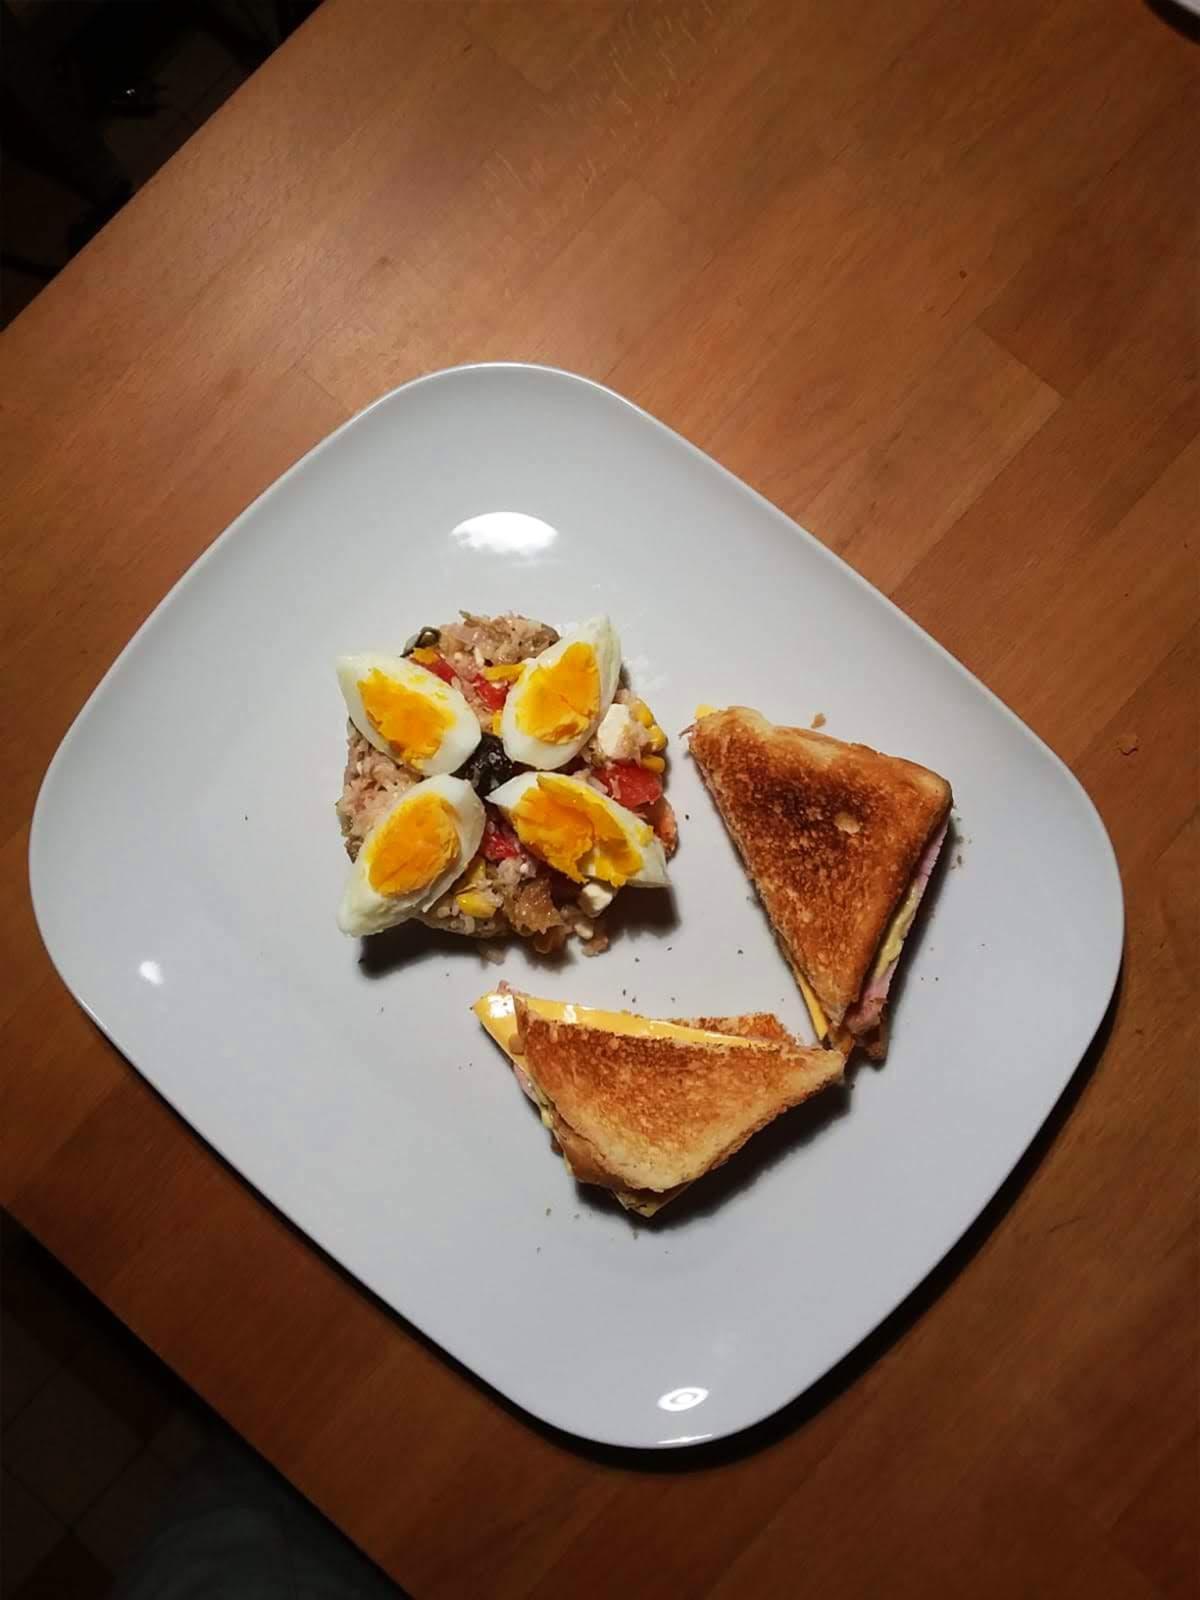 Homemade club sandwich with tuna rice salad and egg topping